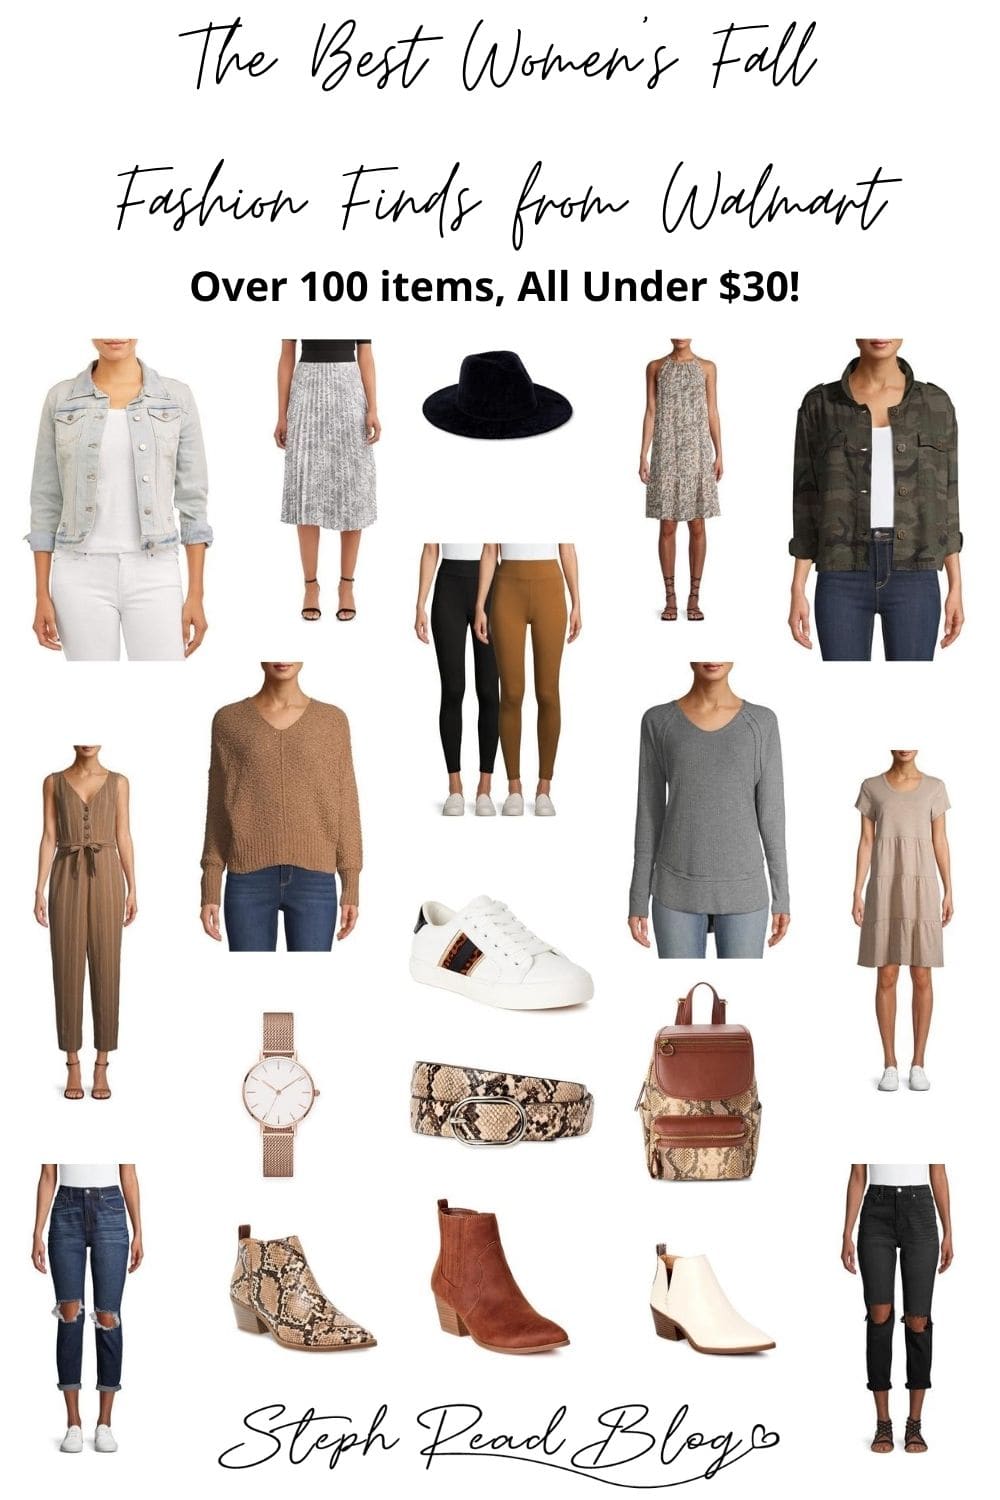 The Best of Women's Fall Fashion from Walmart all under $30